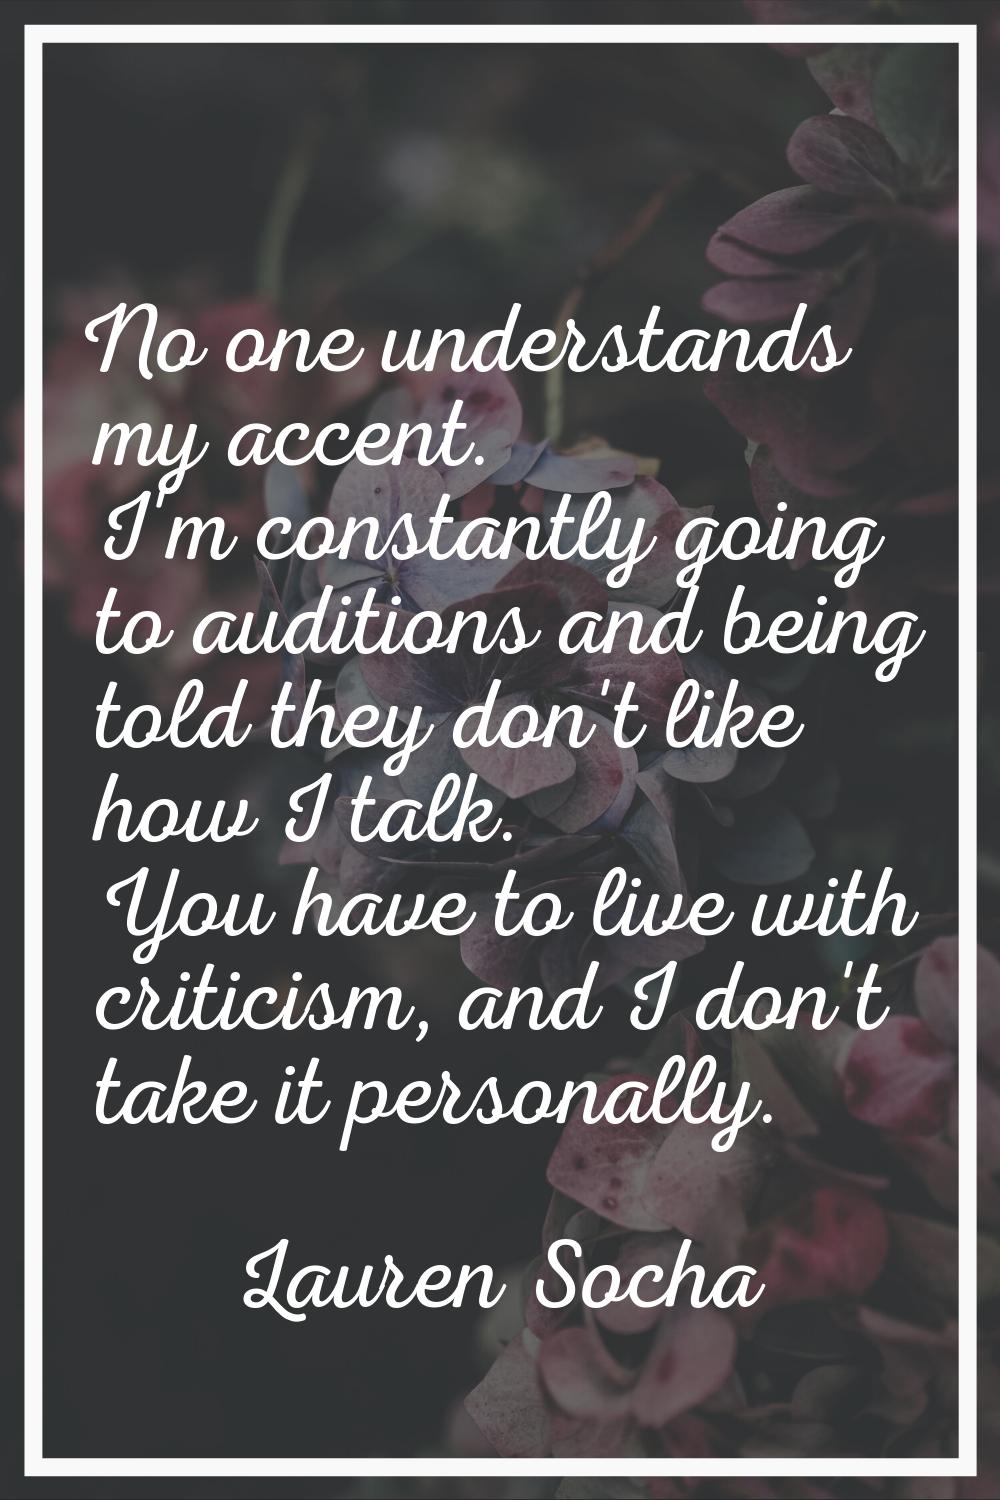 No one understands my accent. I'm constantly going to auditions and being told they don't like how 